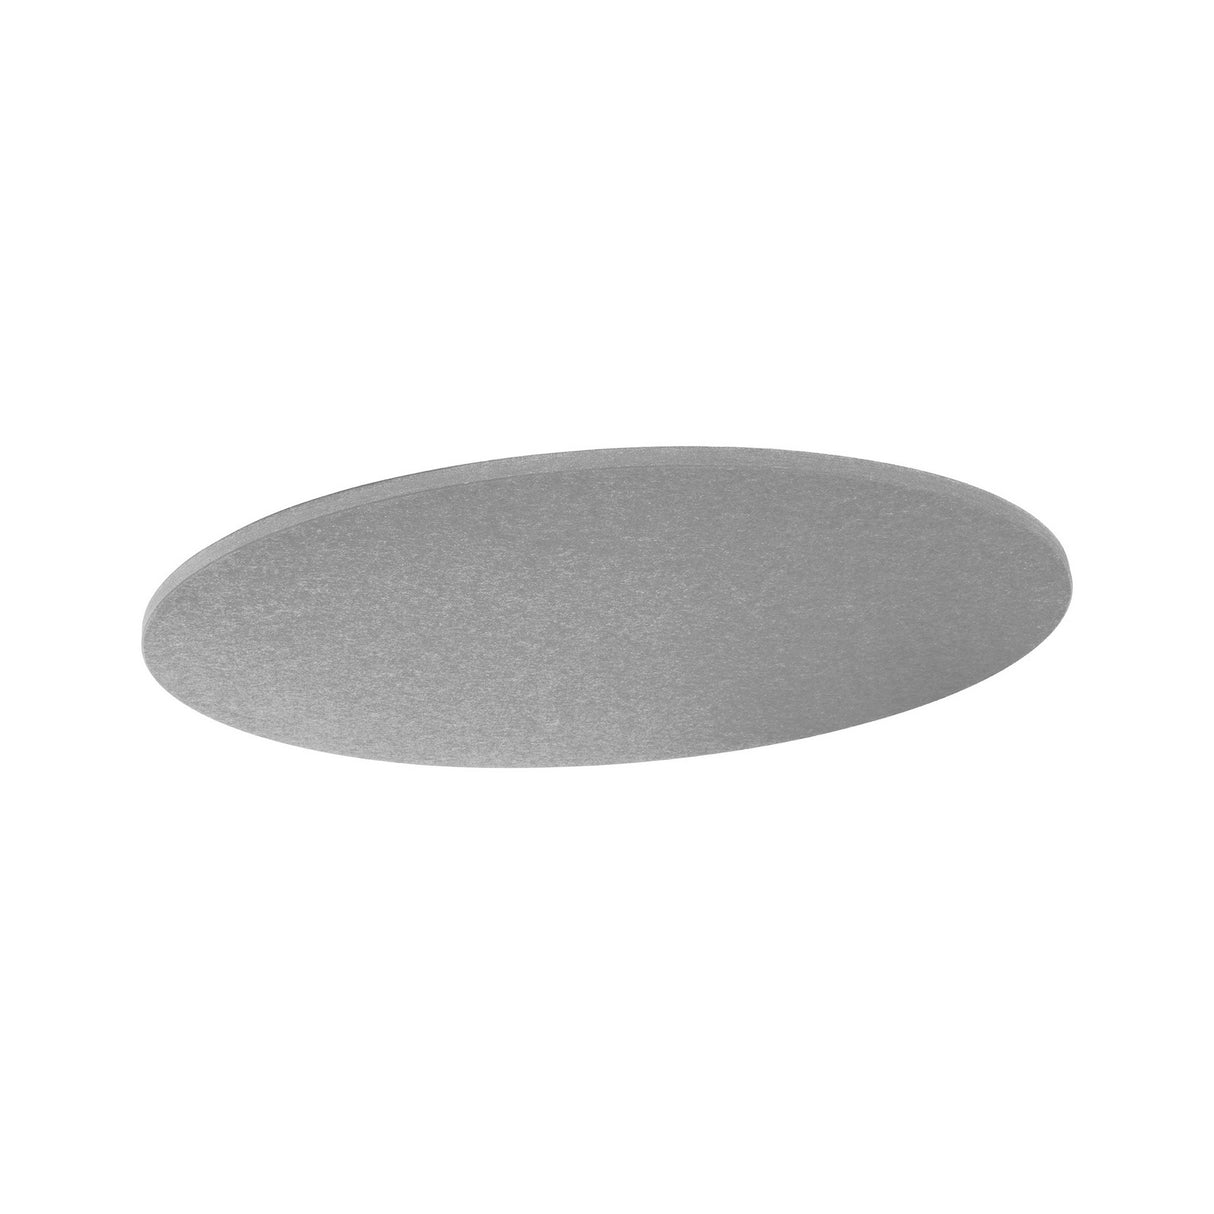 Primacoustic EcoScapes Round Cloud 4-Foot Micro-Beveled Edge Wall Panel, Slate 2-Pack